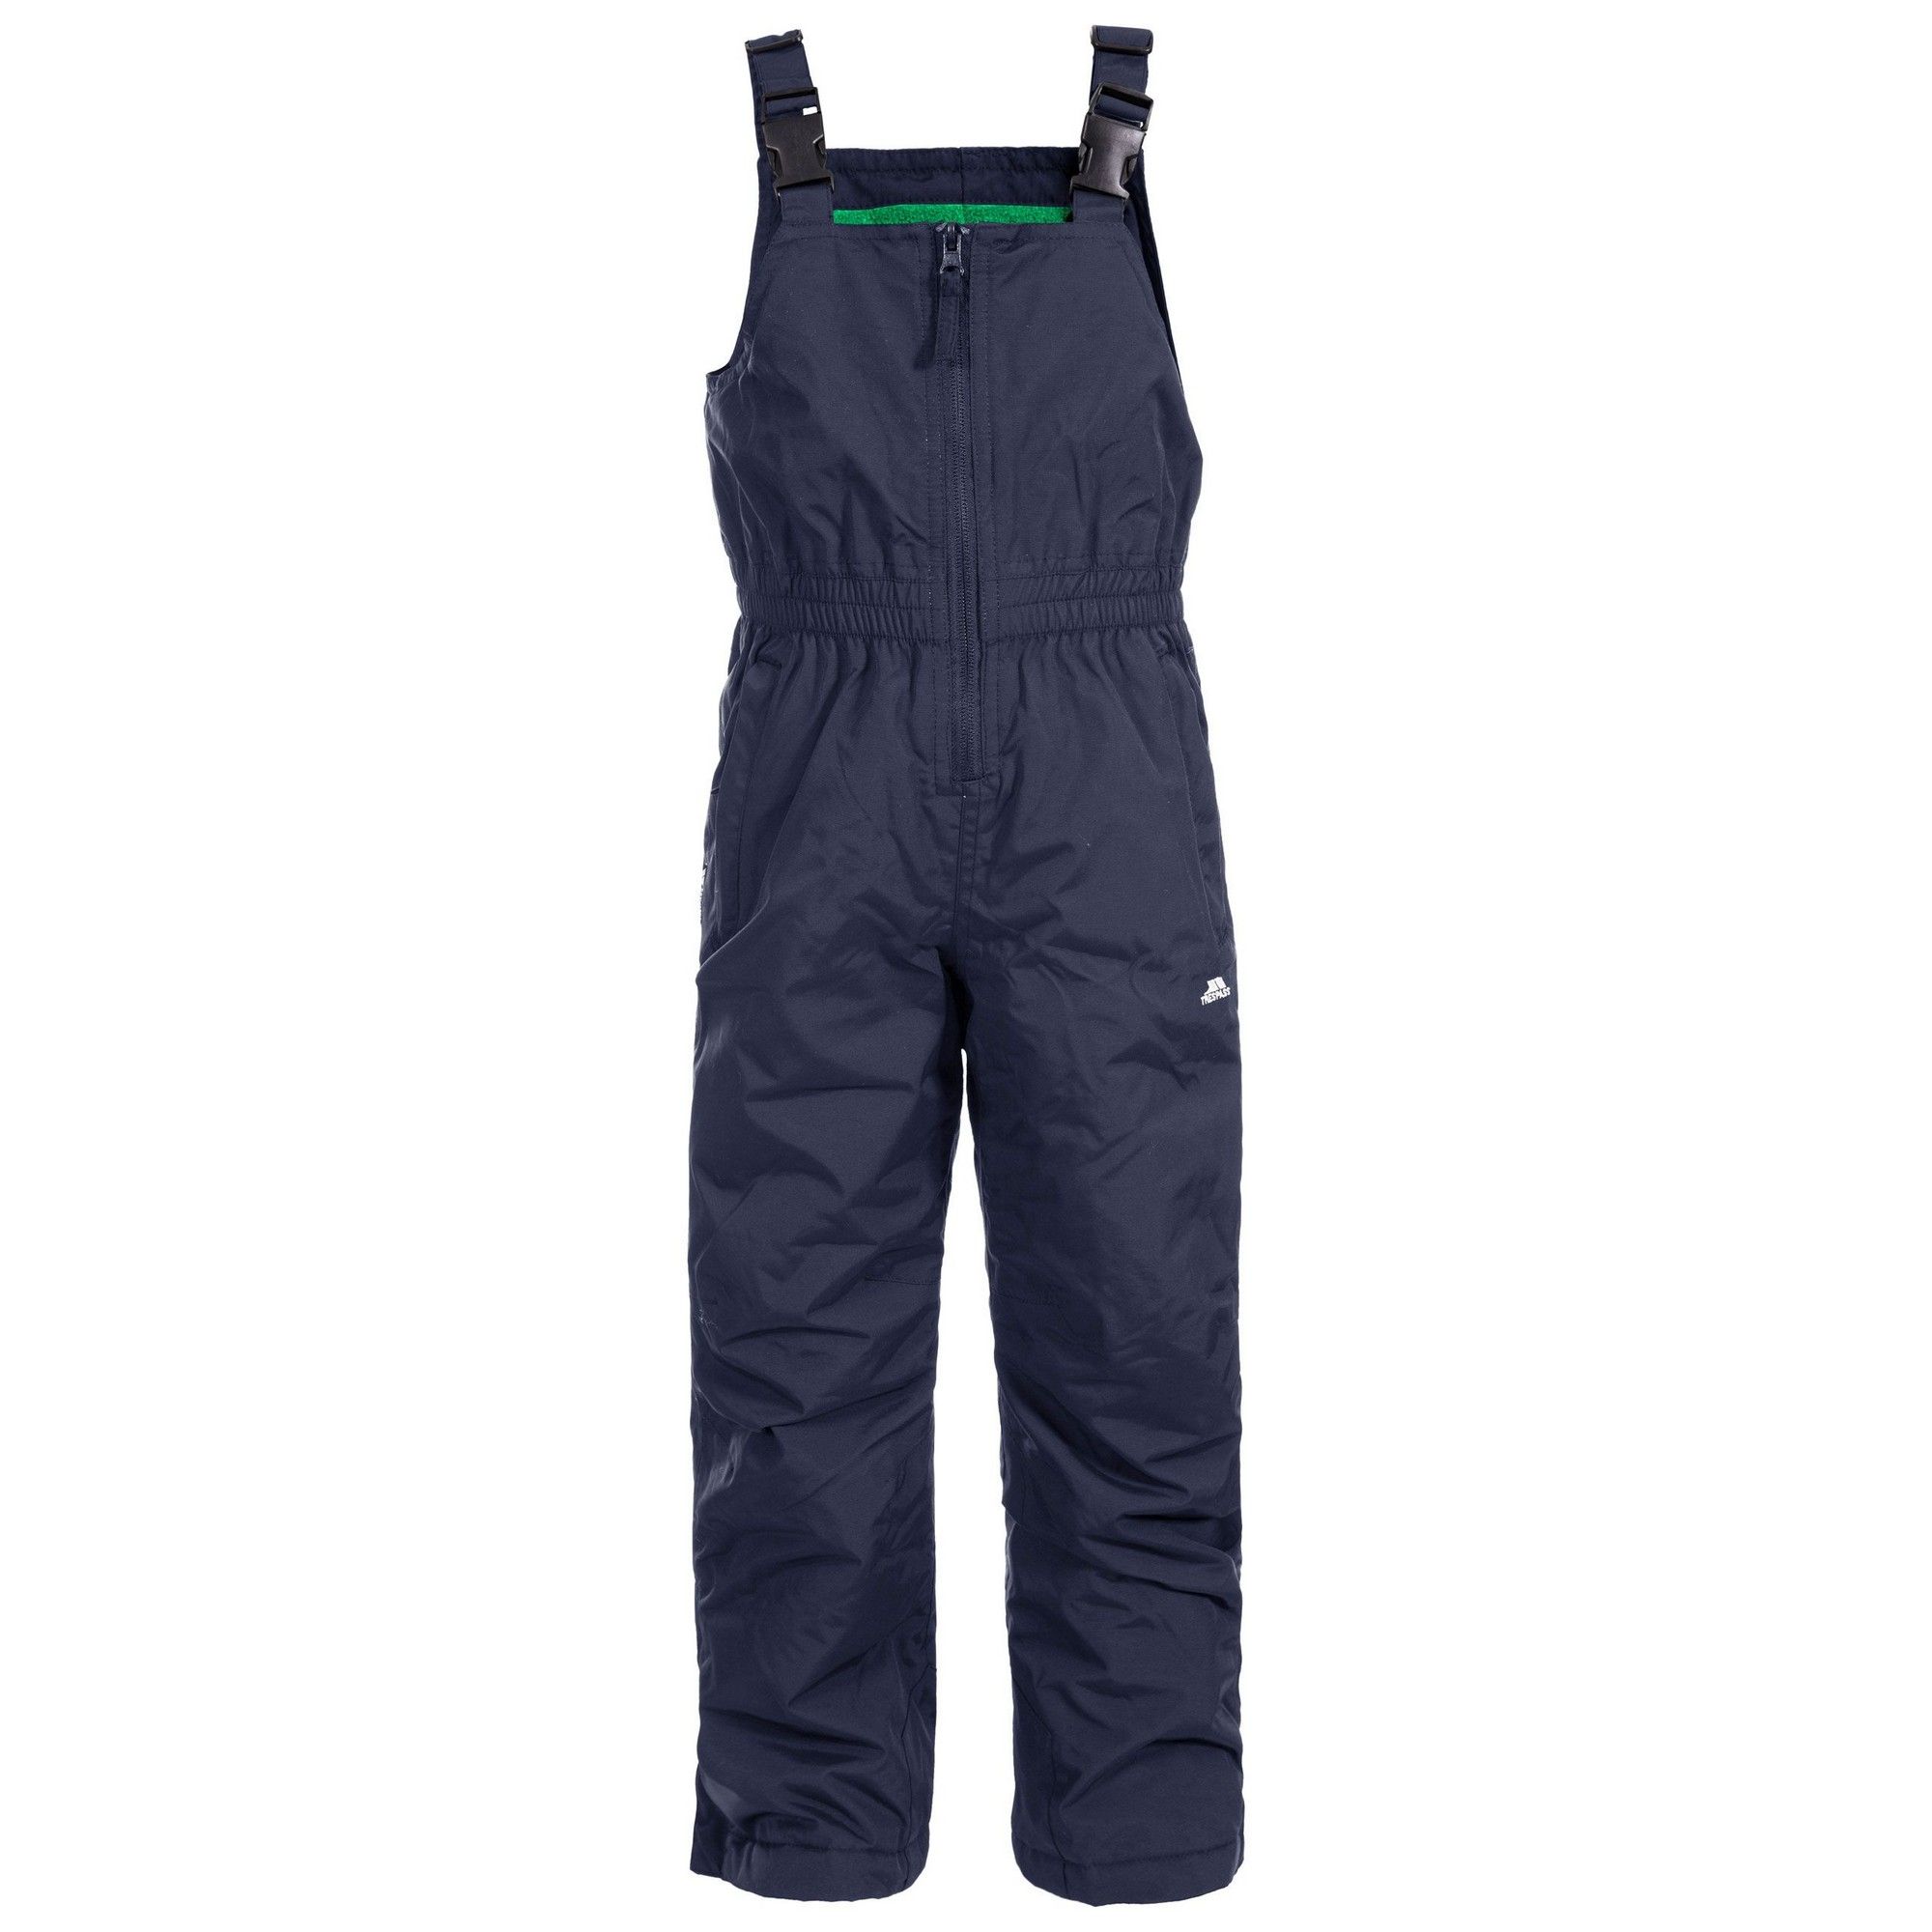 Dungarees and jacket. Padded. Adjustable stud off hood. 3 zip pockets on jacket. Drawcord at hem. Elasticated cuff with adjuster. 2 zipped pockets on dungarees. Ankle gaiters. Elasticated waist. Articulated knees. Inner ankle double layer. Kick panels. Waterproof 3000mm, breathable 3000mm, windproof. Taped seams. Shell: 100% Polyamide PU coating, Lining: 100% Polyester, Padding: 100% Polyester.